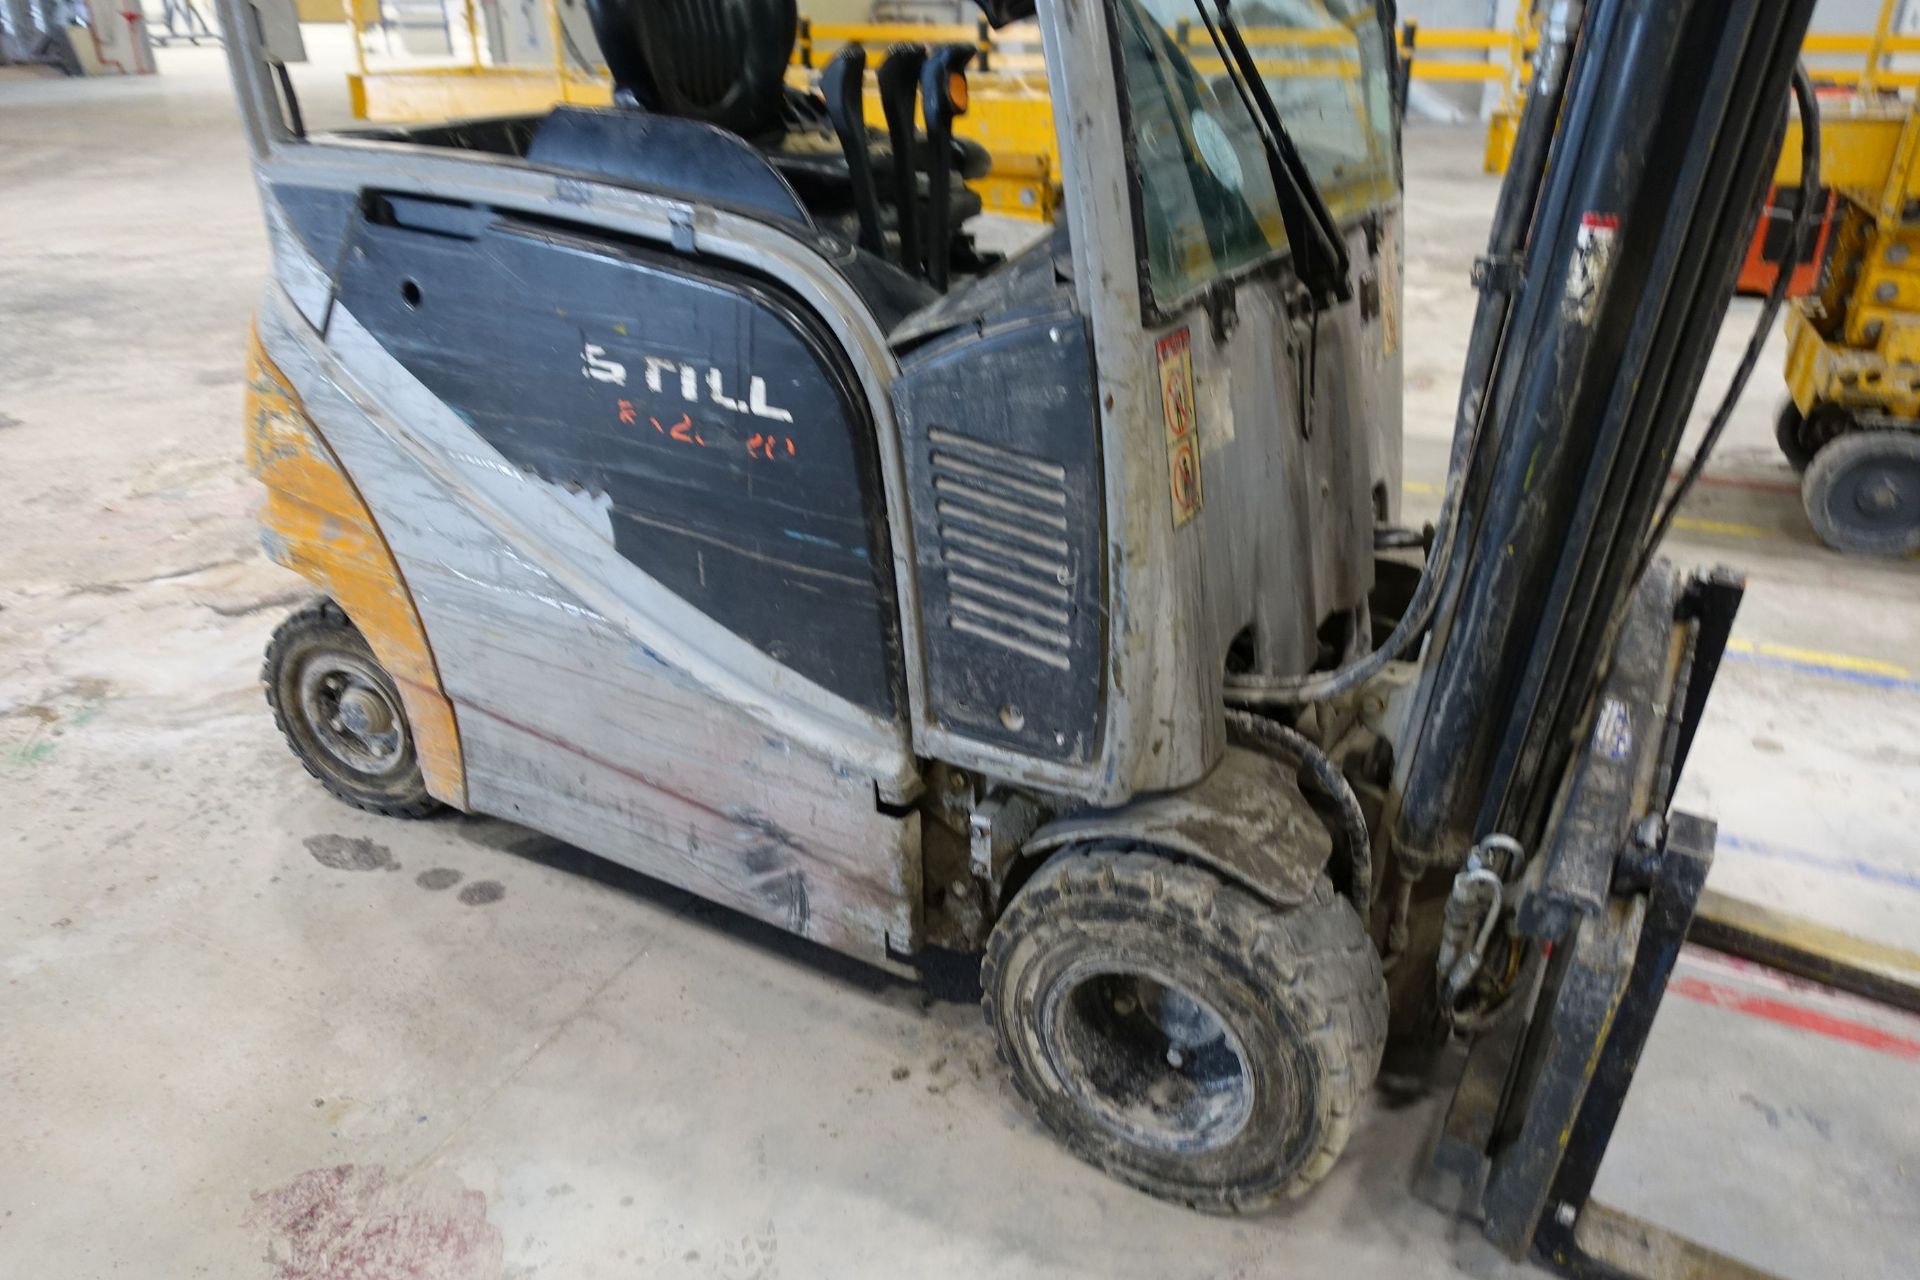 STILL RX20-20P Electric Forklift Truck, 2,000kg Capacity with Sideshift, Ser # 516216H00371 (2017) - Image 11 of 42